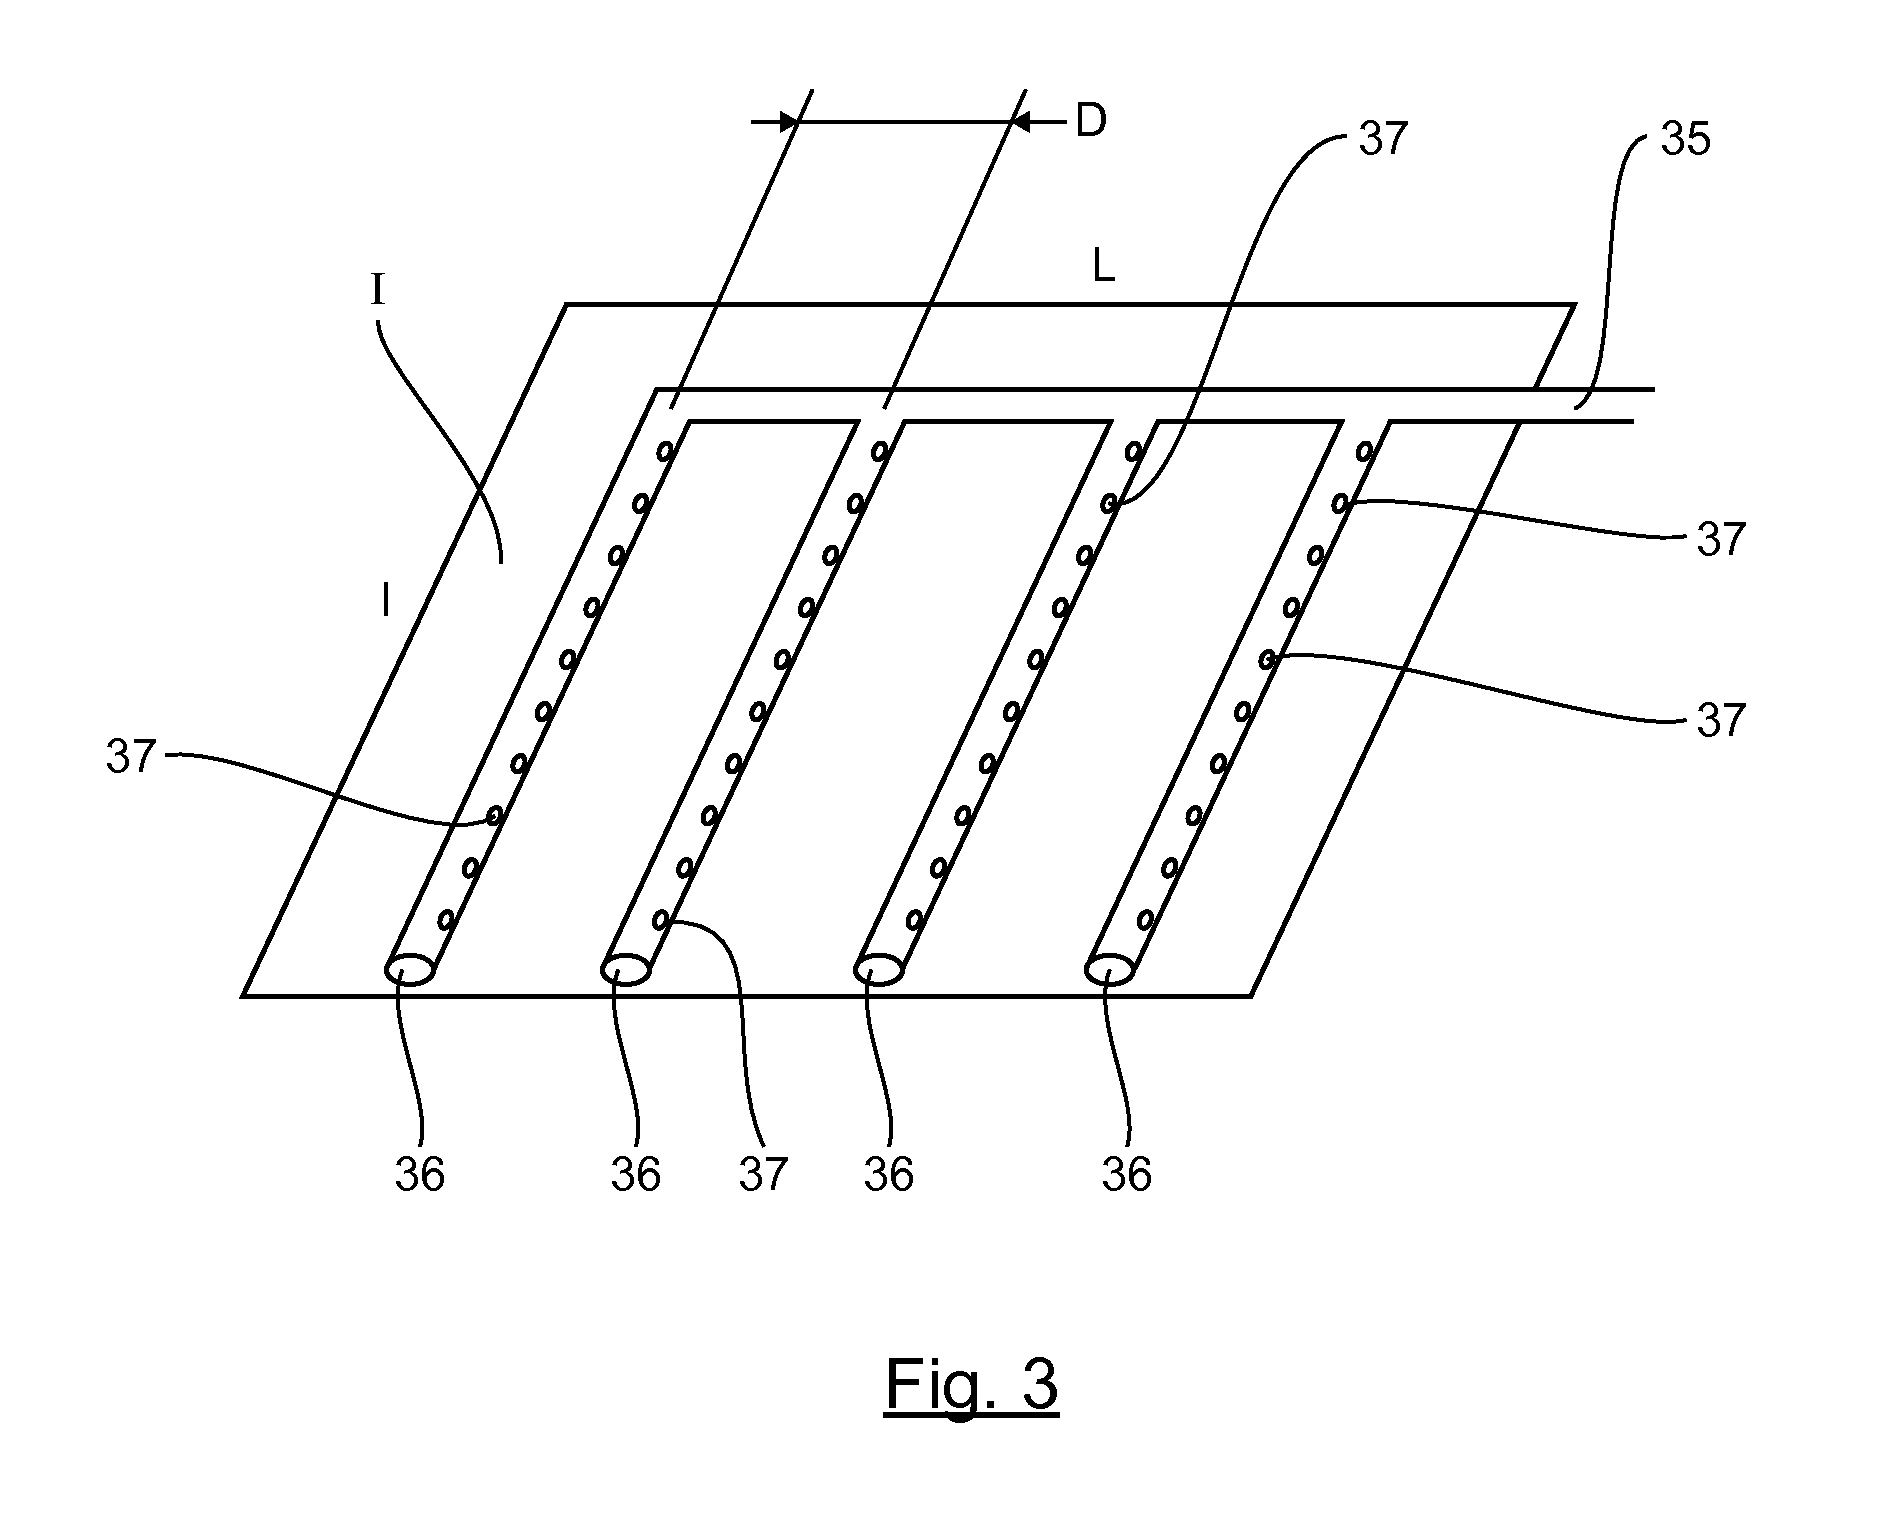 Water treatment process comprising floatation combined with gravity filtration, and corresponding equipment